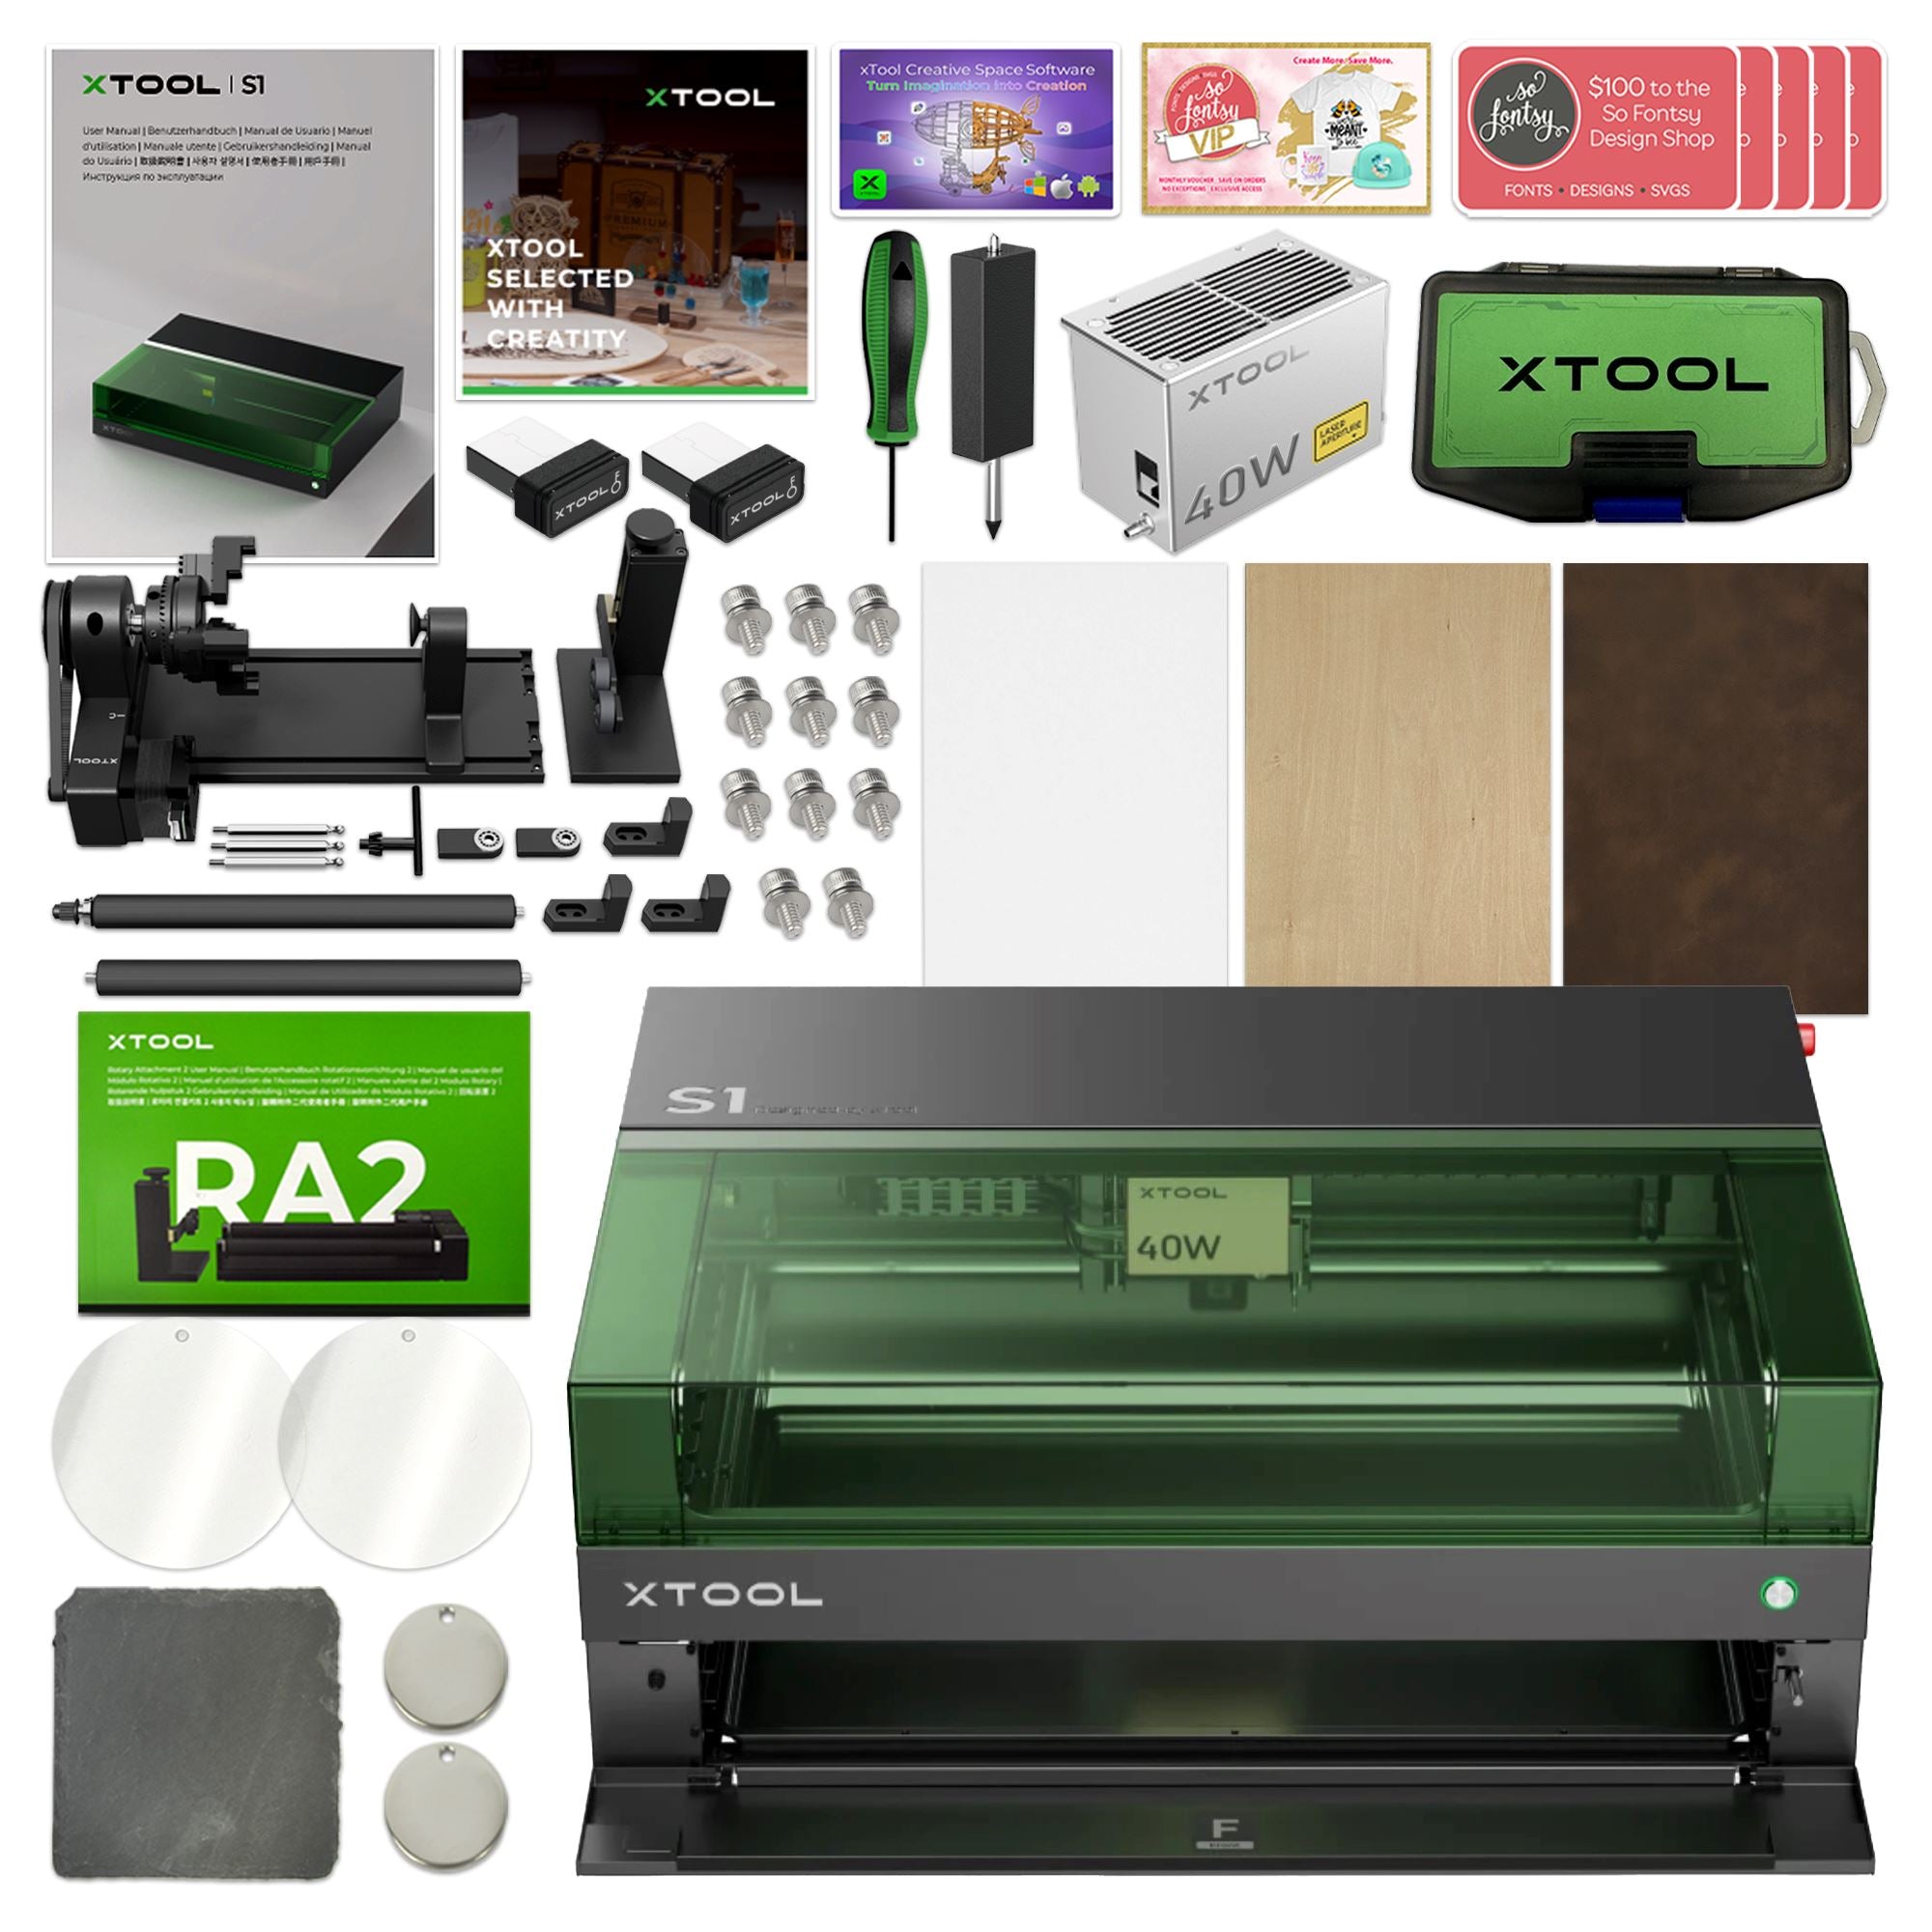 xTool S1 Laser Cutter & Engraver Machine with Screen Printing Bundle - 40W Diode Laser +$500